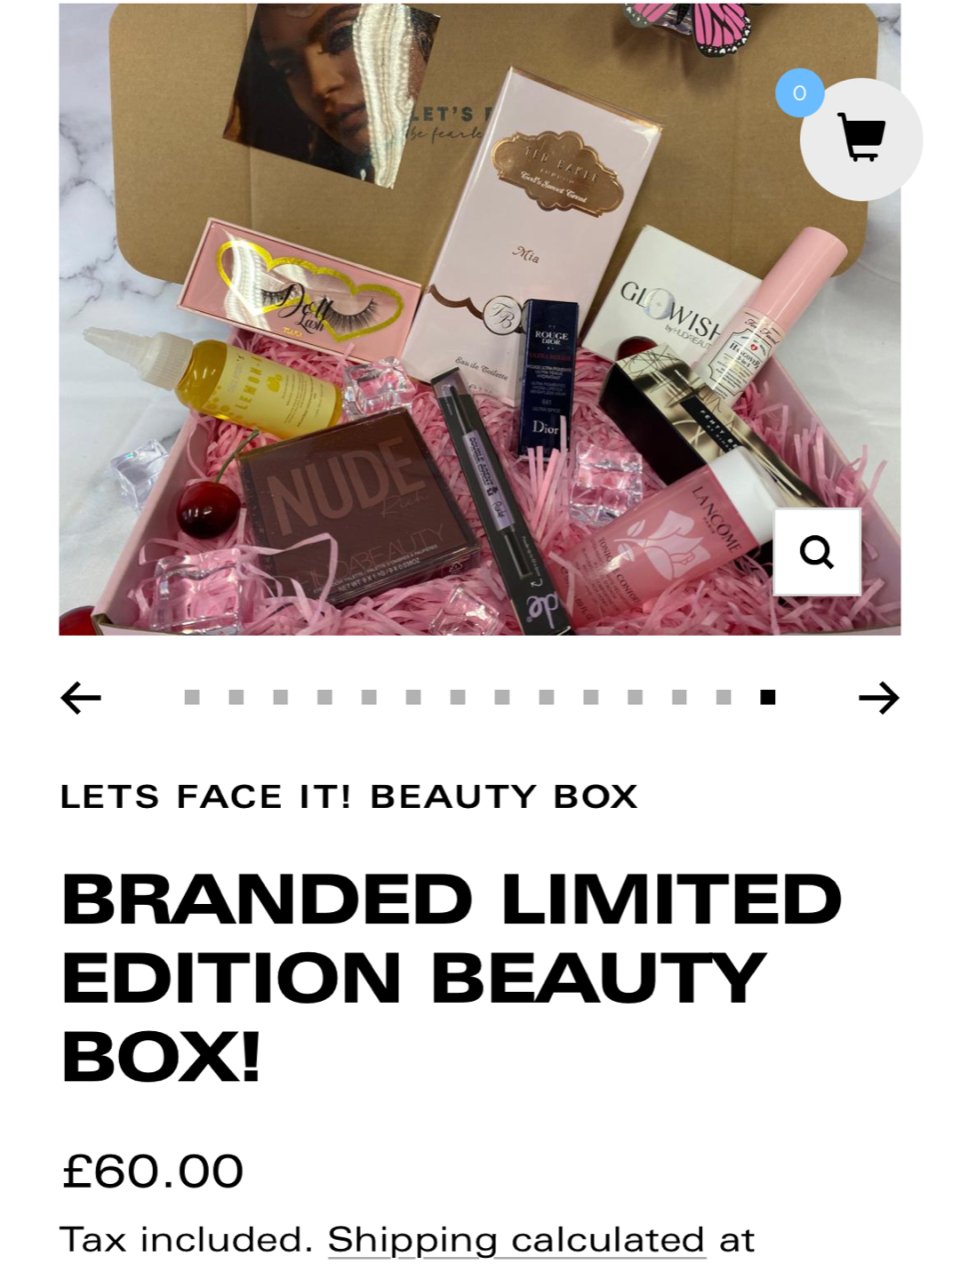 Branded Limited Edition Beauty box! – Lets Face It! Beauty Box